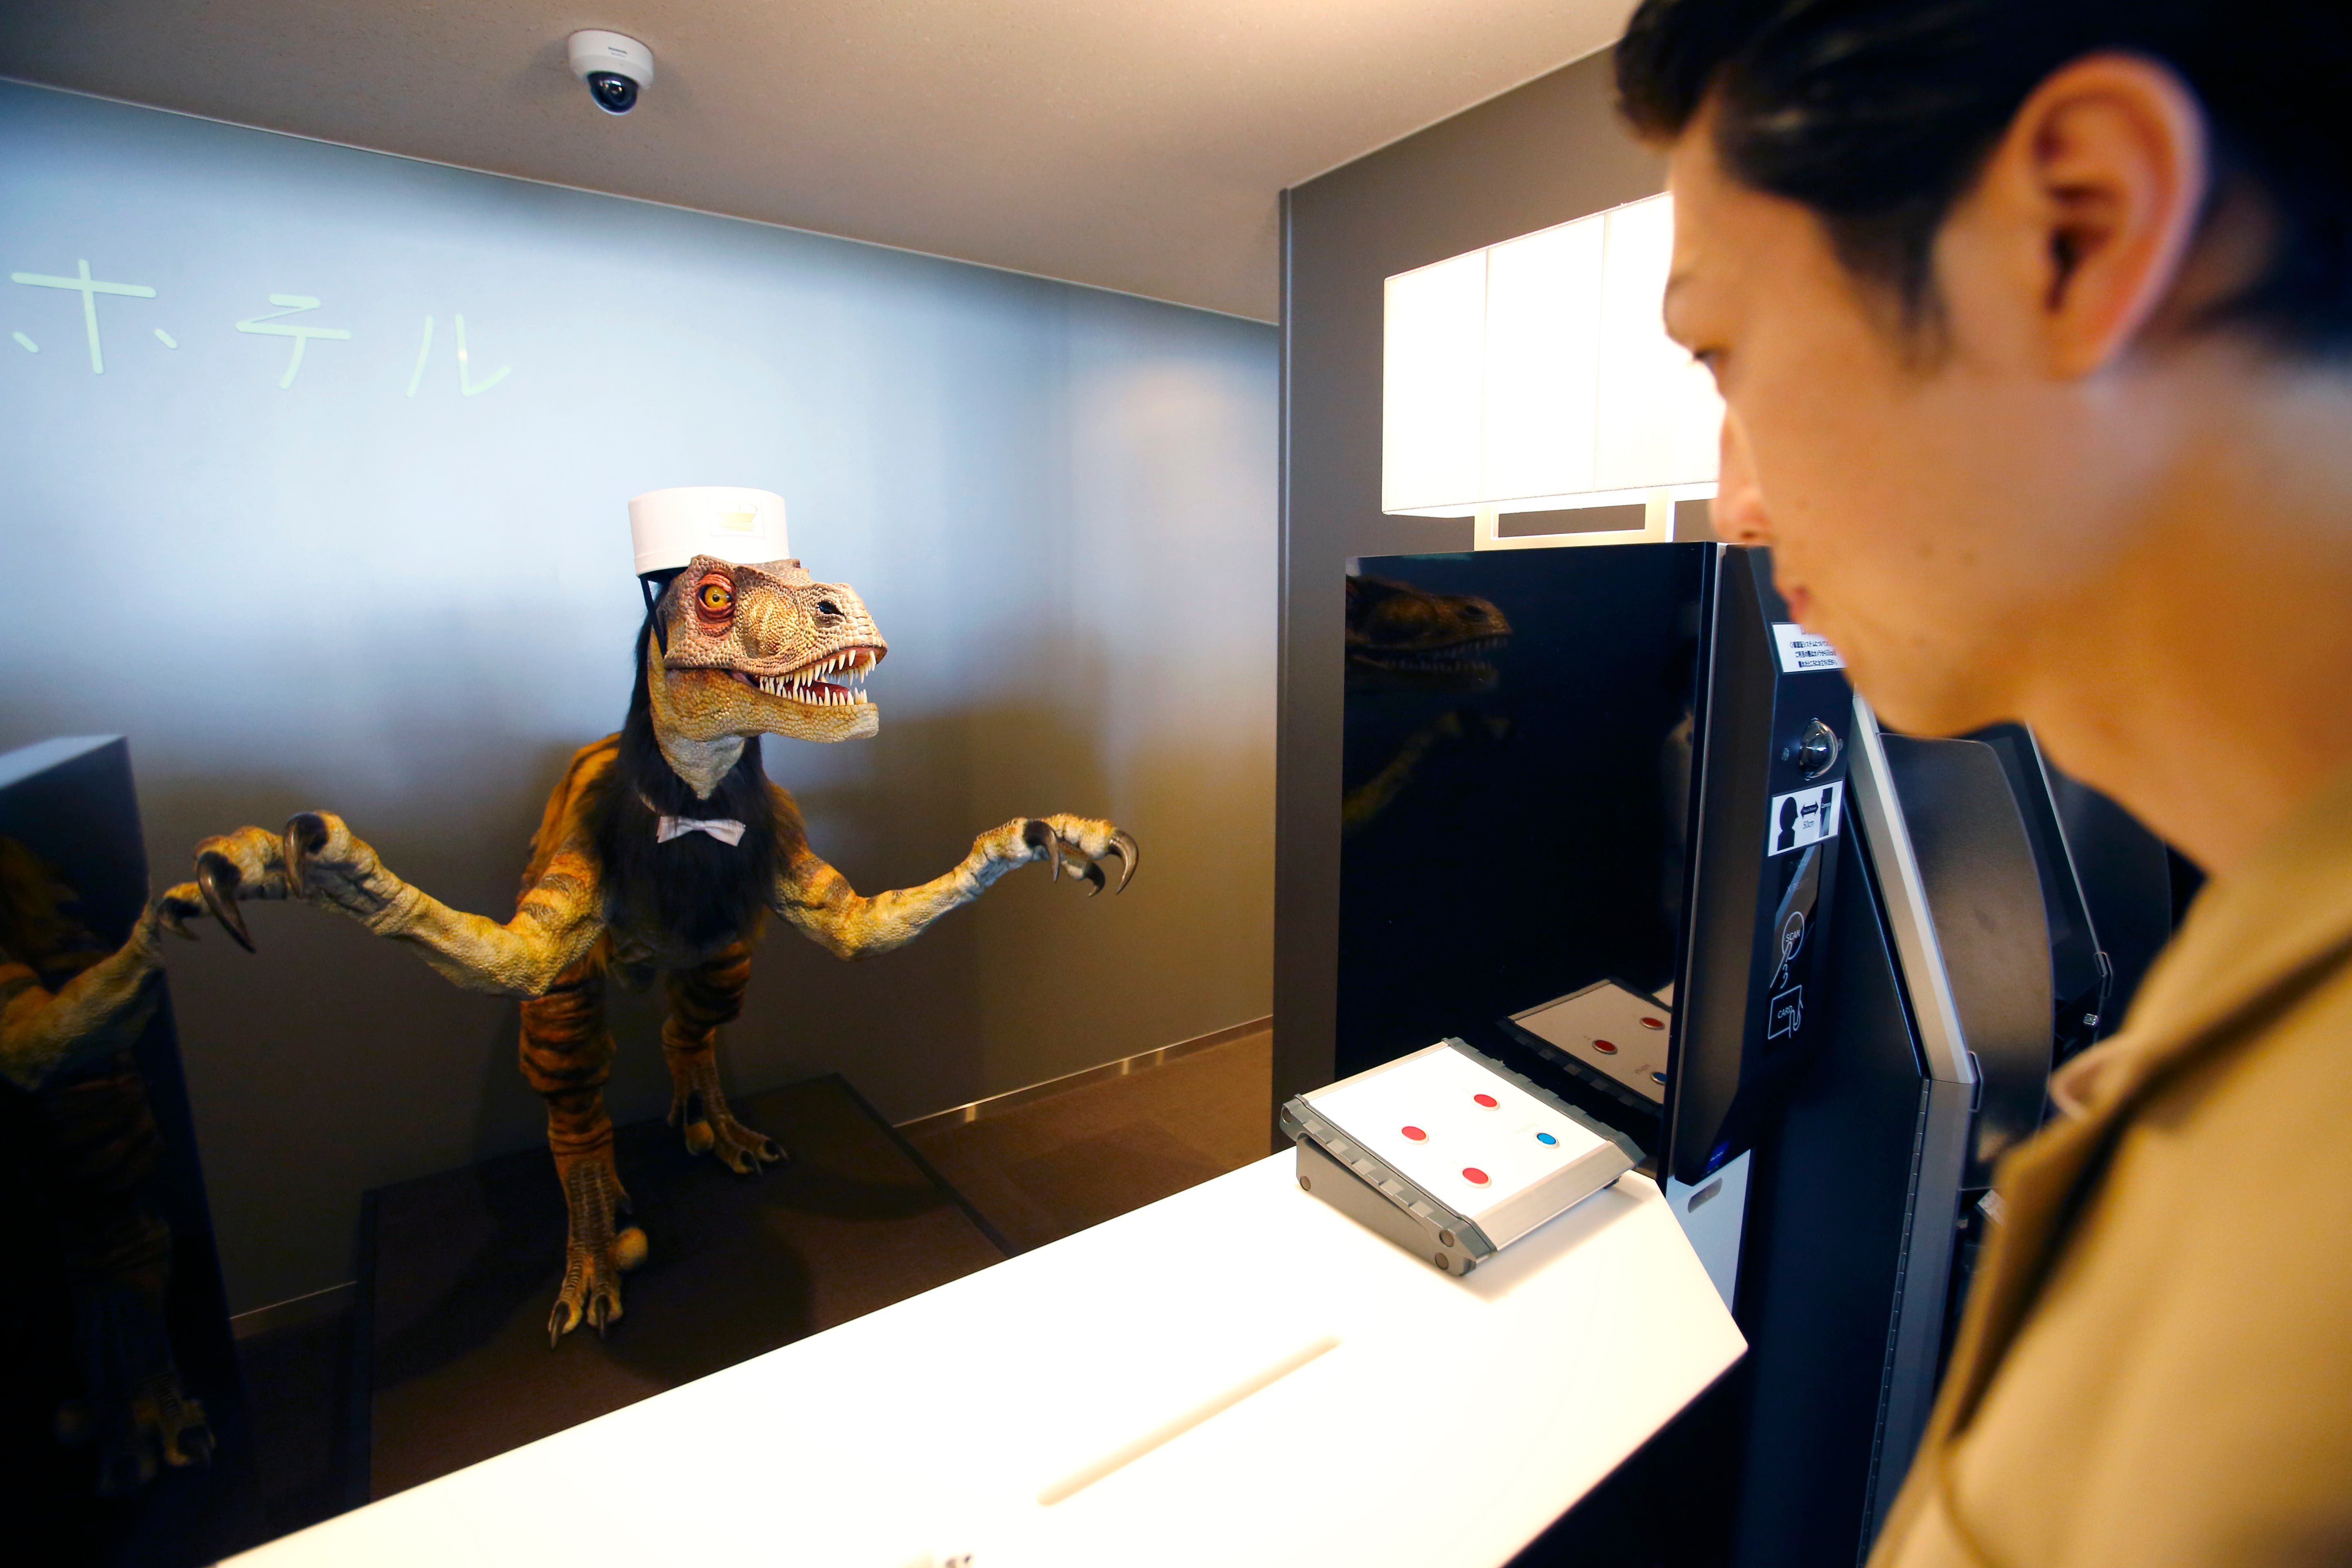 A receptionist dinosaur robot greets a hotel employee demonstrating how to check in for the media at the new hotel, aptly called Henn na Hotel or Weird Hotel, in Sasebo, southwestern Japan, Wednesday, July 15, 2015. 